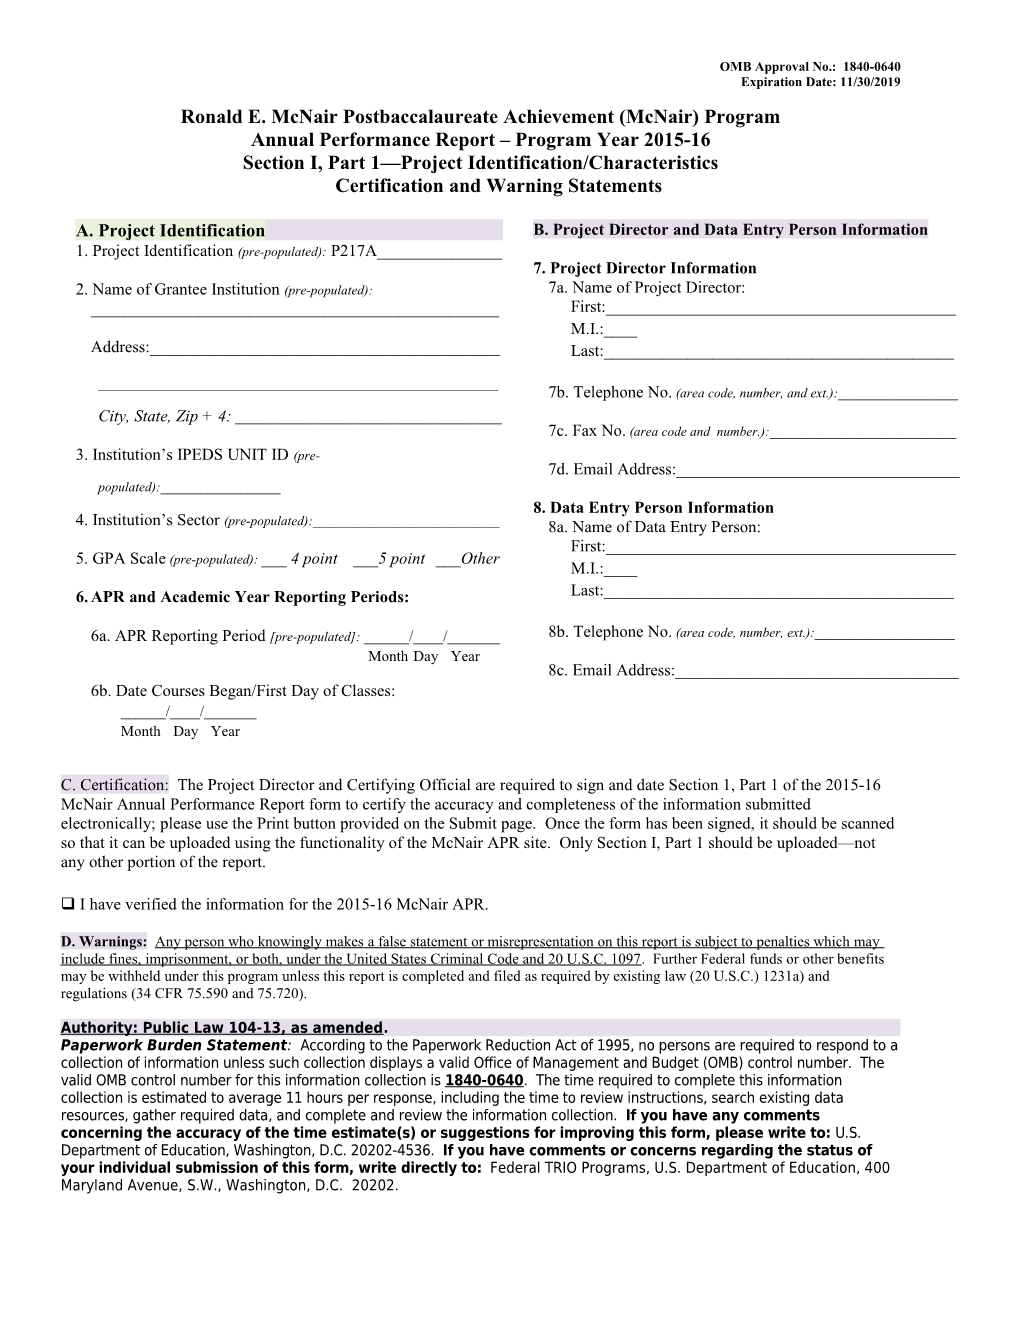 2015-2016 Annual Performance Report Form Under the Ronald Mcnair Program (MS Word)